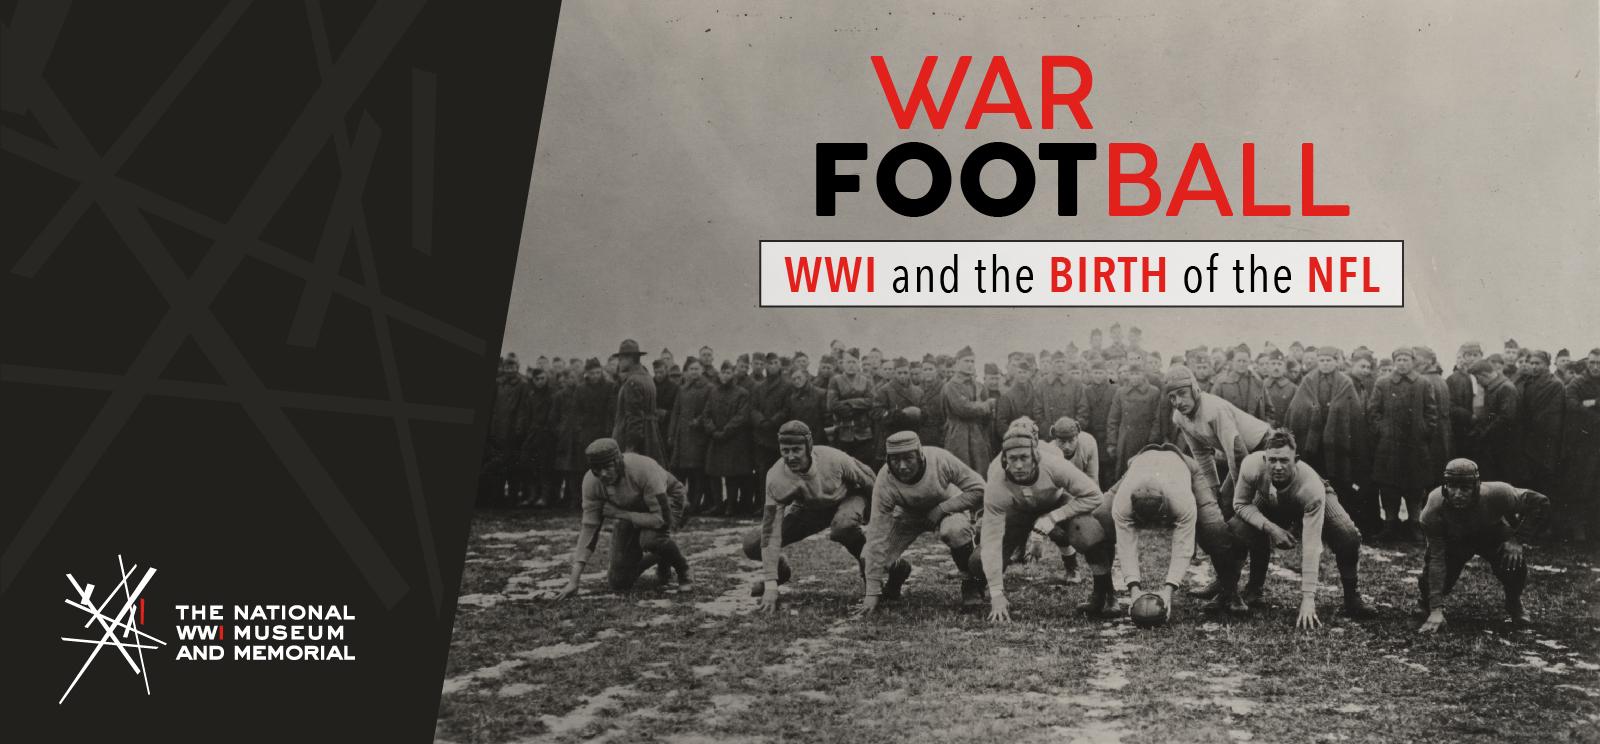 Image: Black and white photograph of football players in an offensive formation. Text: War Football / WWI and the Birth of the NFL